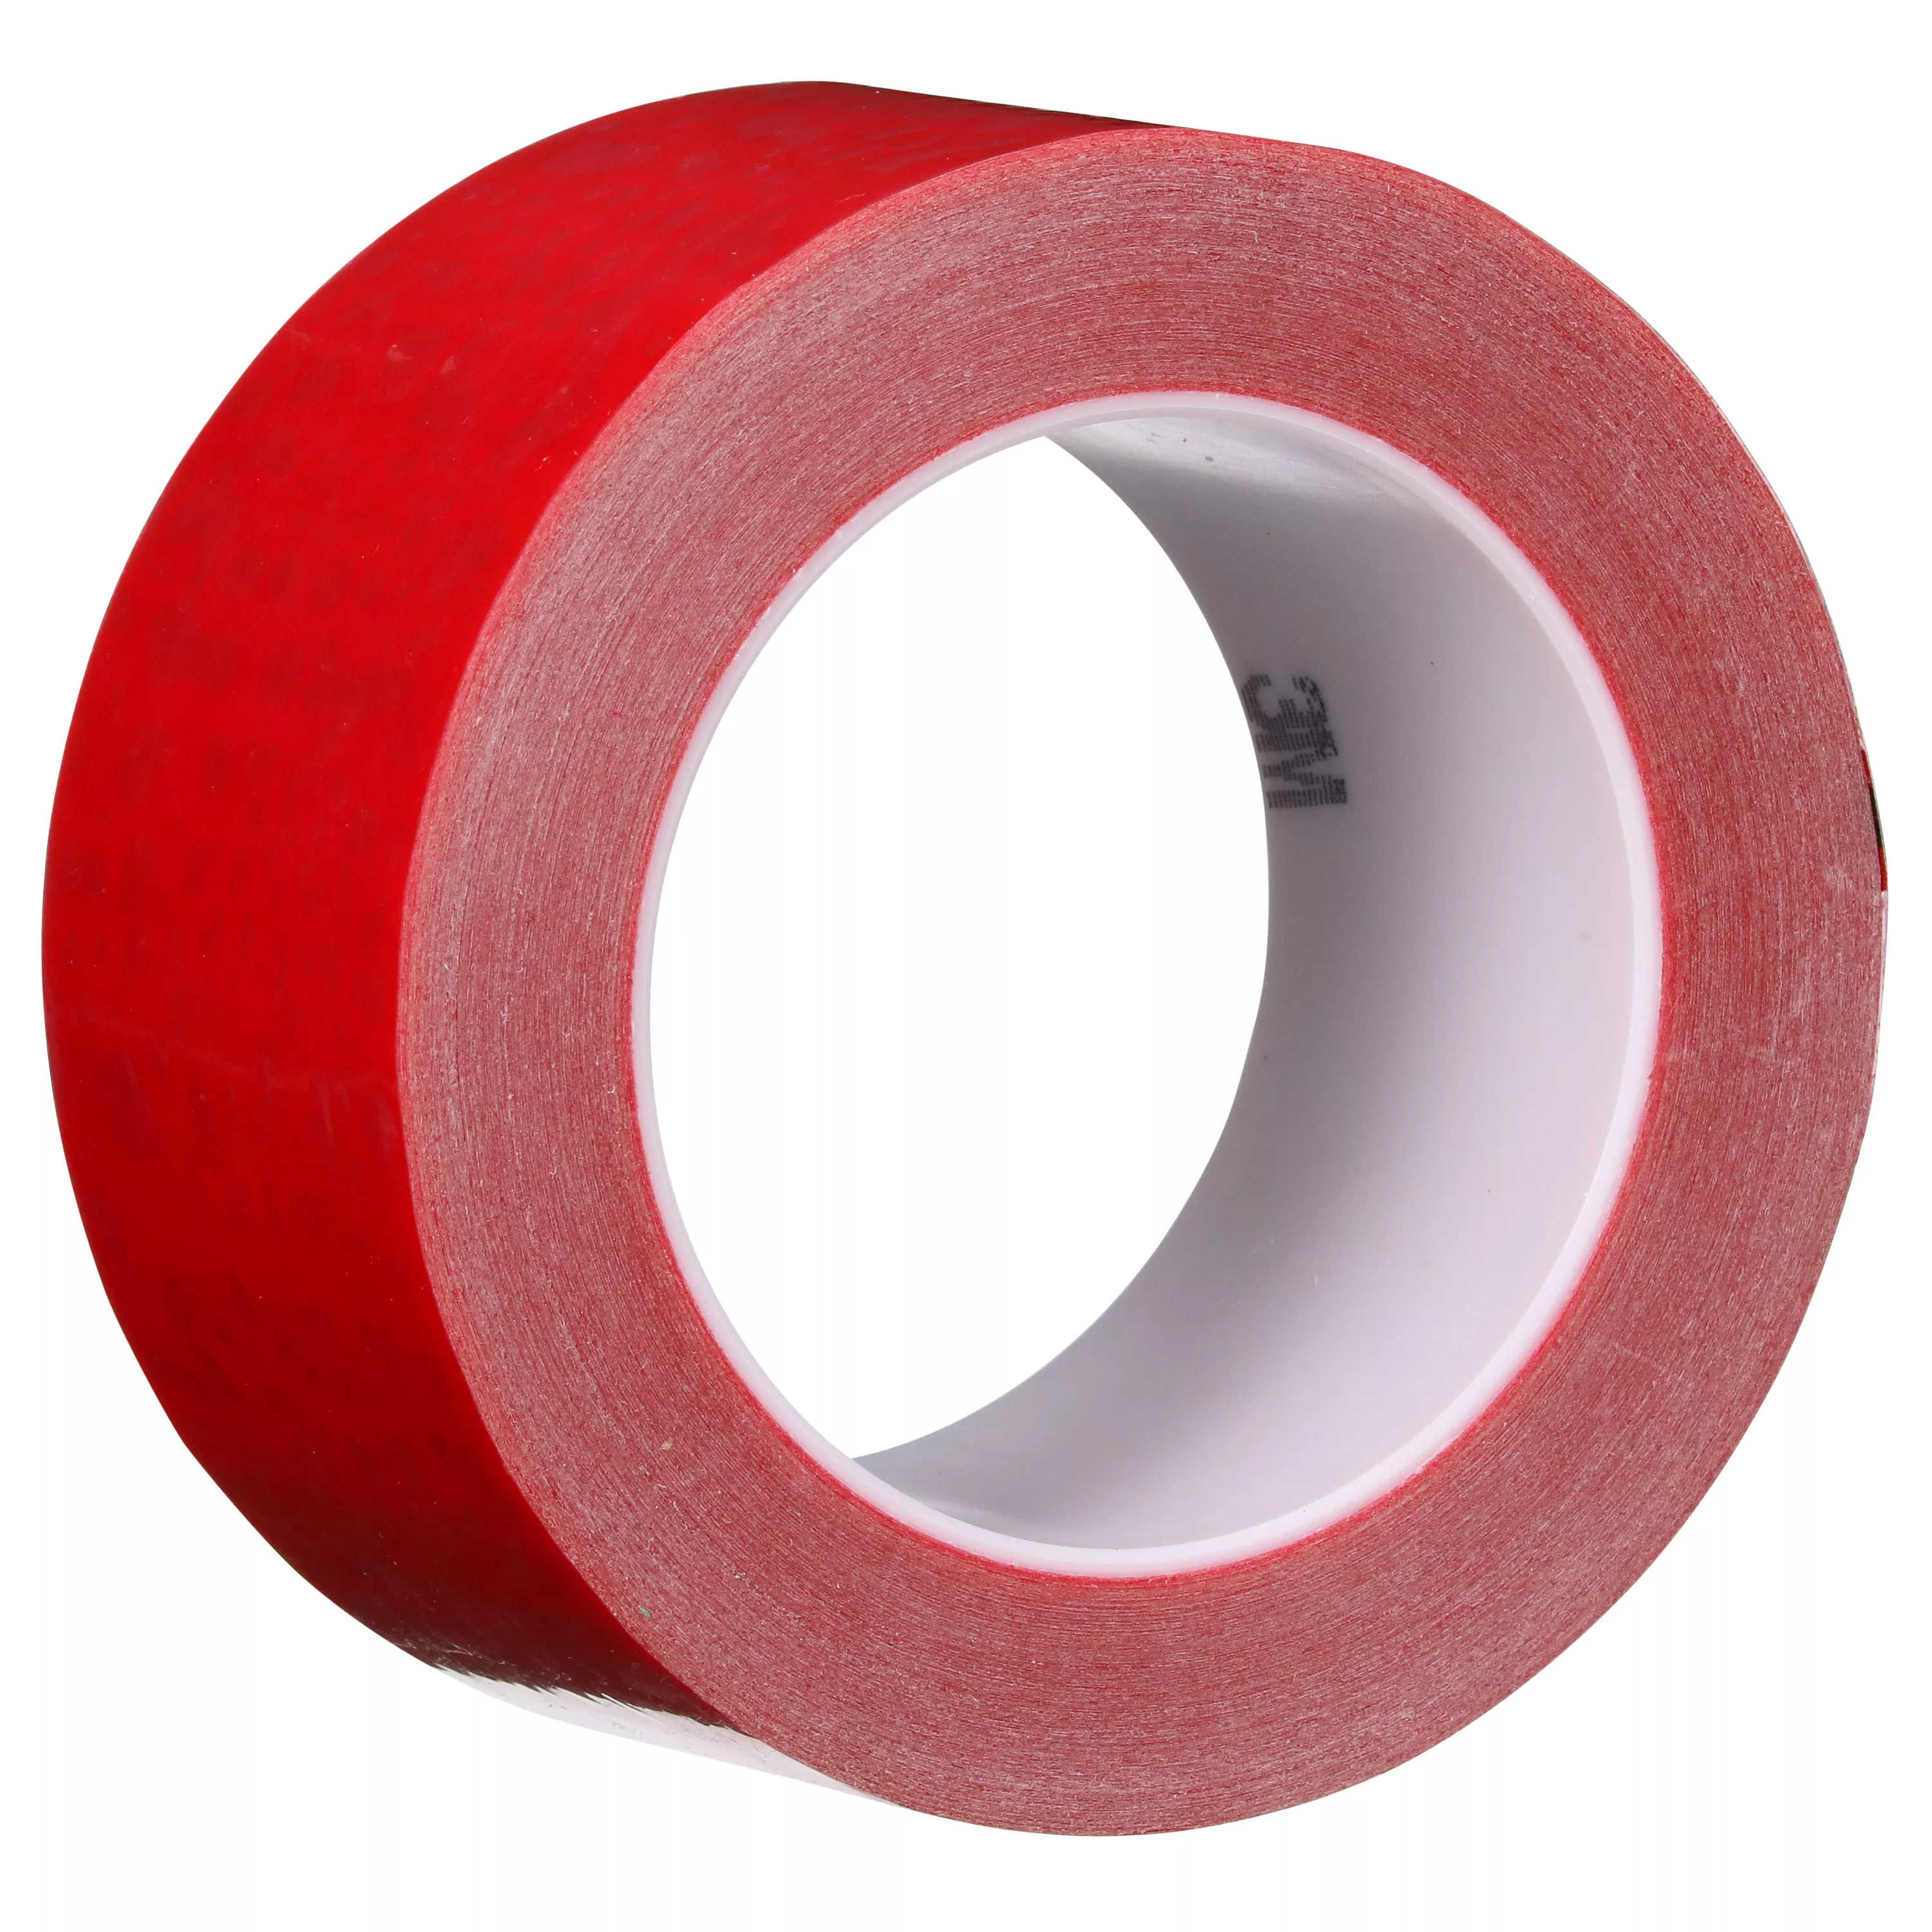 3M™ Polyester Protective Tape 335, Pink, 2 in x 144 yd, 1.6 mil, 6
Roll/Case